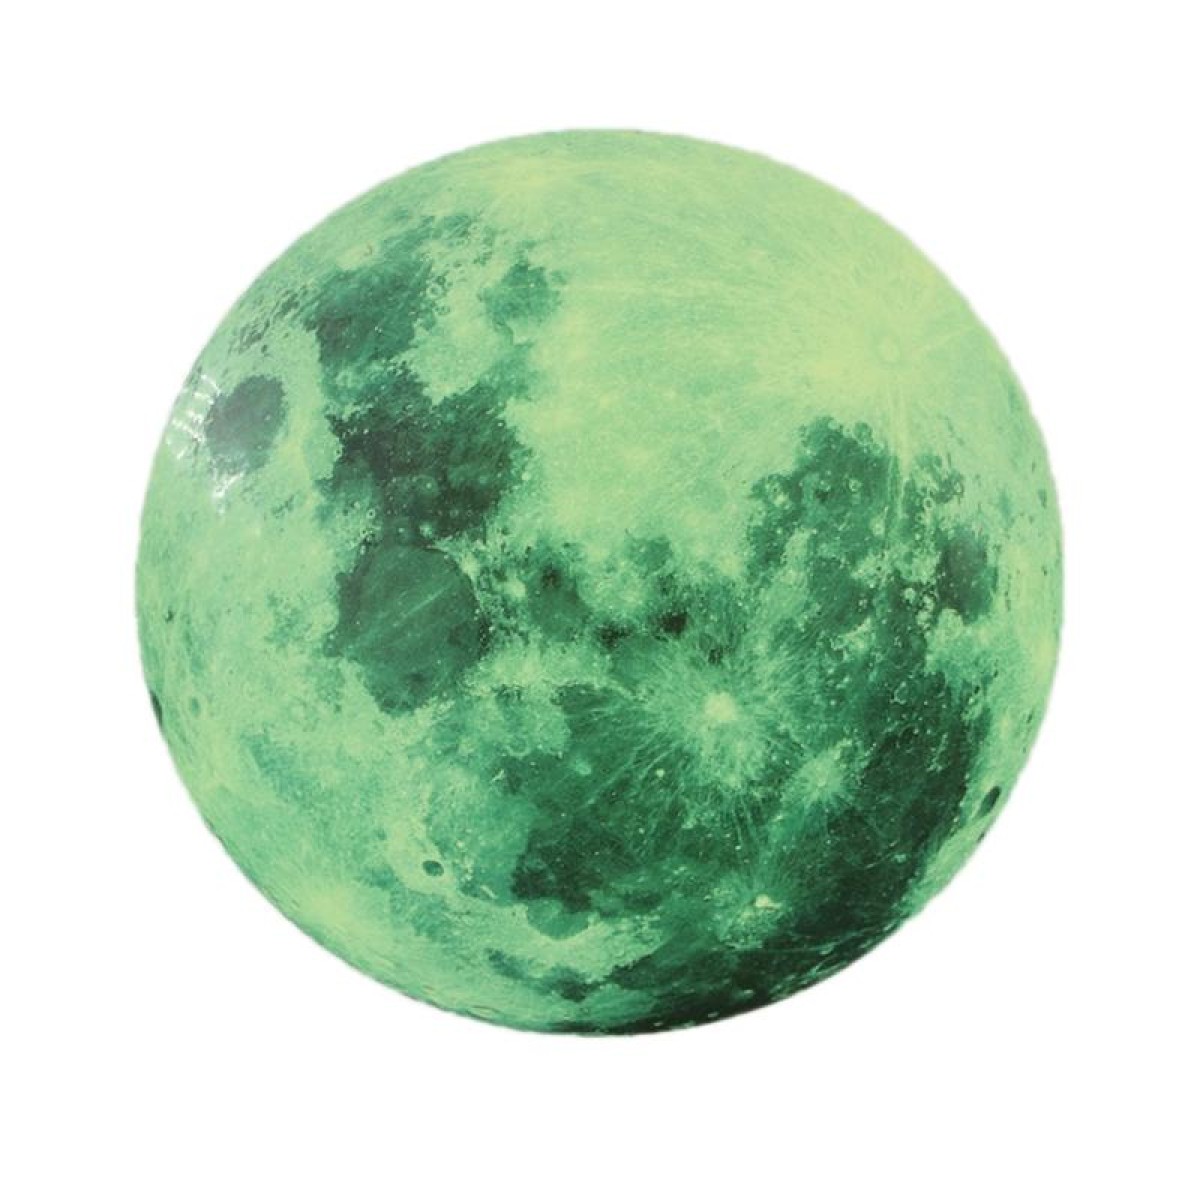 AFG33003 Home Decoration Luminous Stars Moon PVC Stickers, Specification:Green Moon 12cm